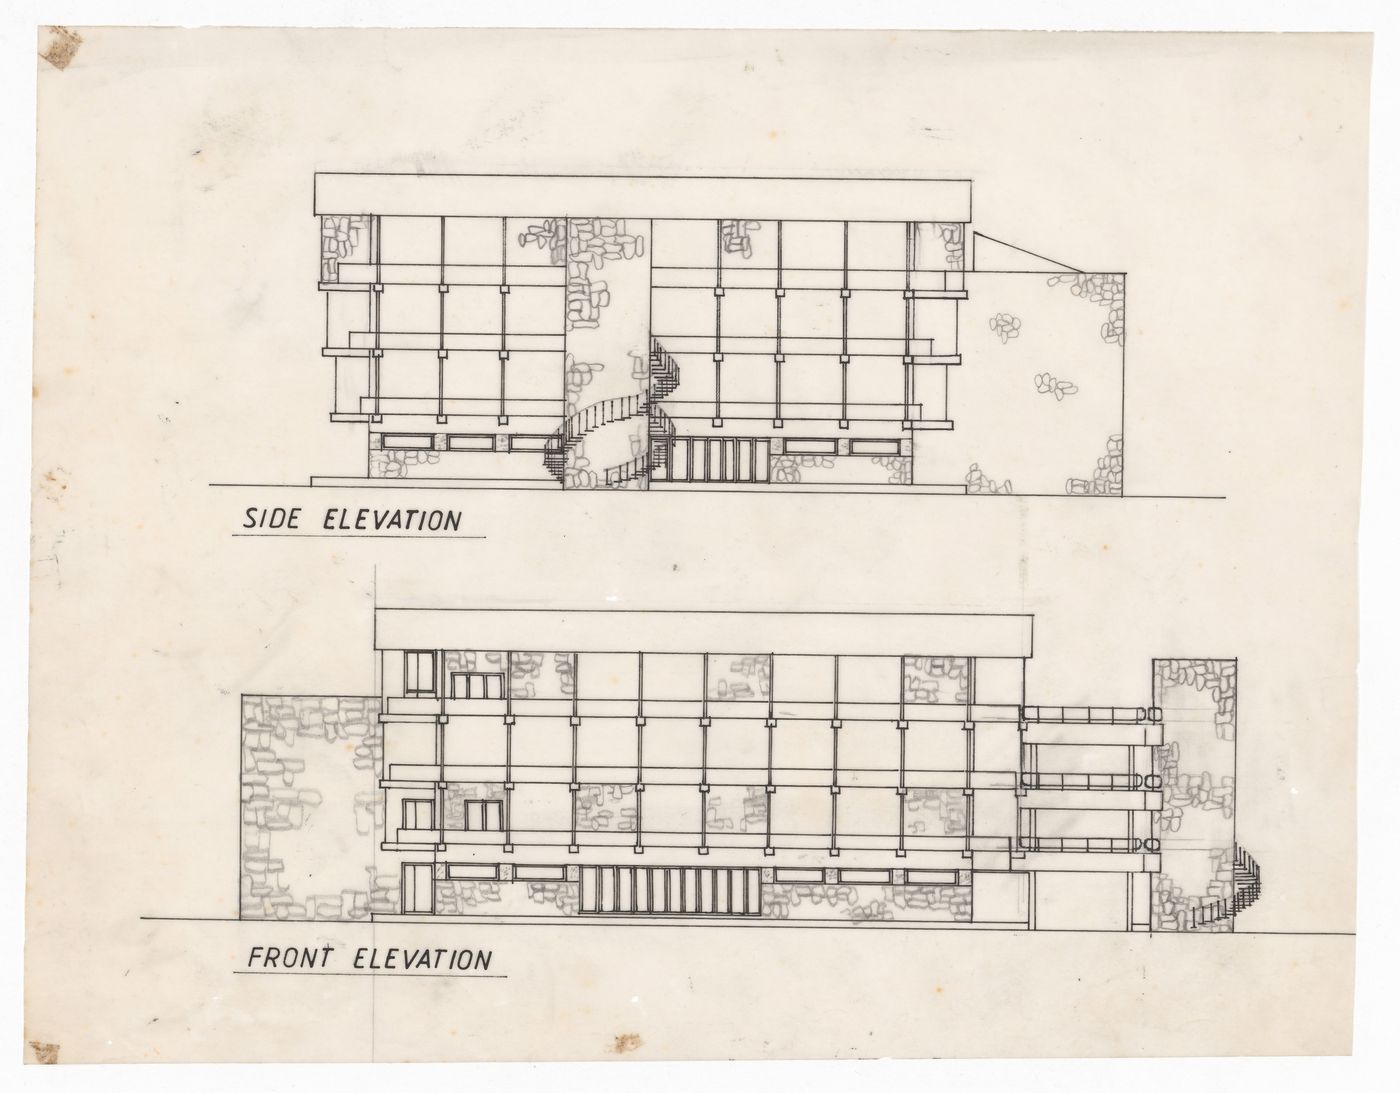 Side and front elevations for Theatre for J&K Academy of Art, Culture and Languages, Jammu, India